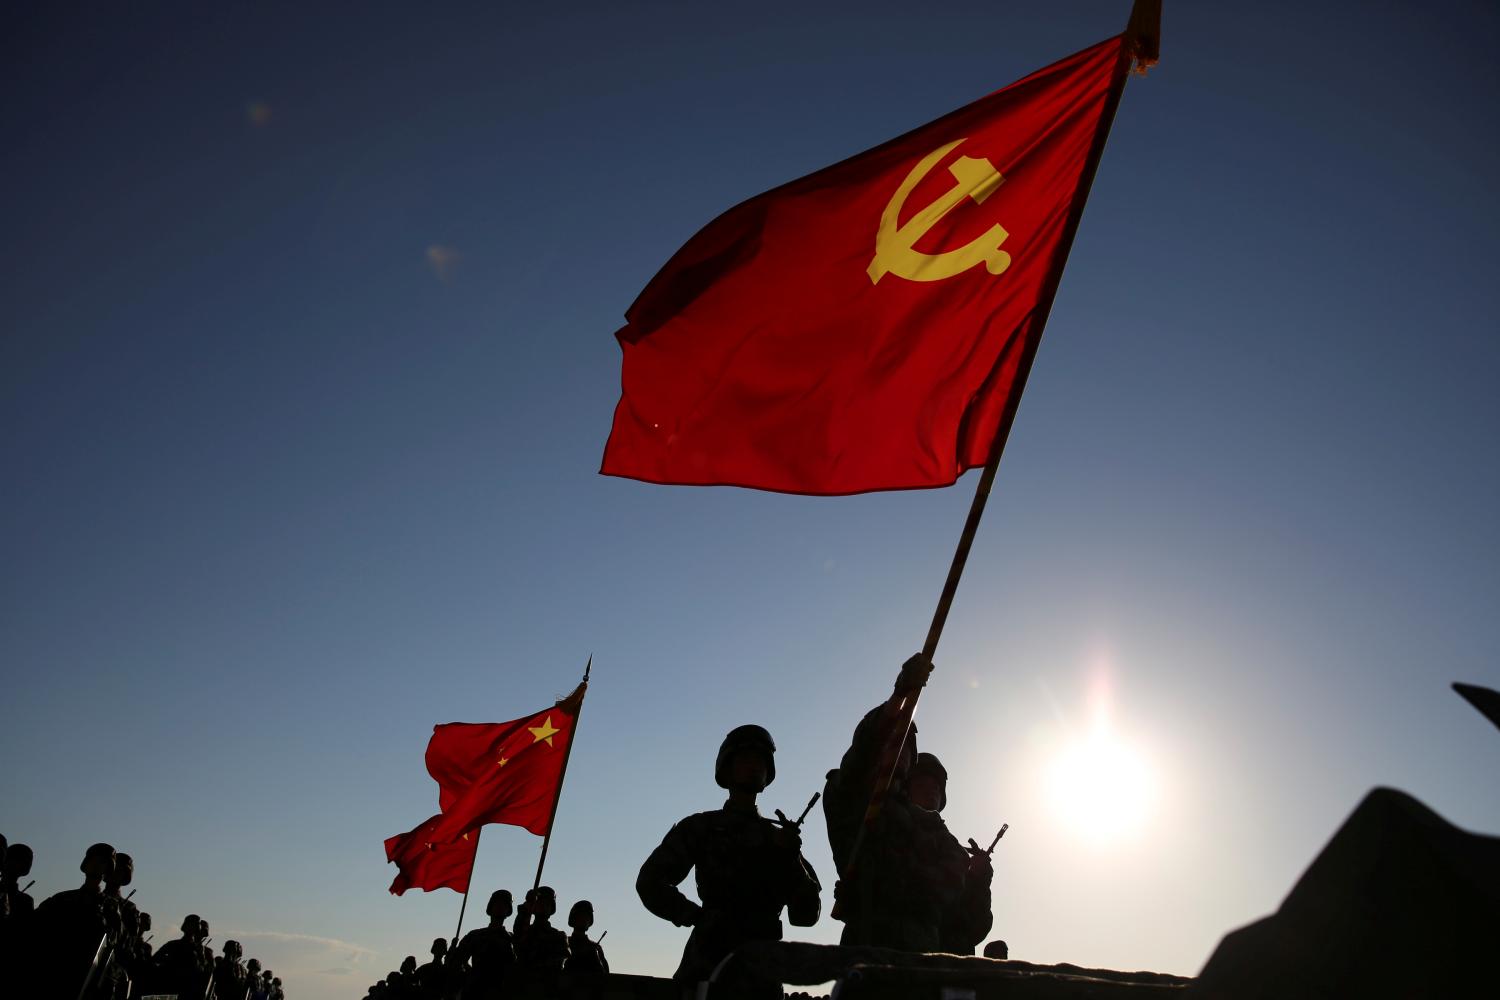 Soldiers carry a Chinese Communist Party flag and Chinese national flags before the military parade to commemorate the 90th anniversary of the foundation of China's People's Liberation Army (PLA) at Zhurihe military base in Inner Mongolia Autonomous Region, China, July 30, 2017. REUTERS/Stringer ATTENTION EDITORS - THIS IMAGE WAS PROVIDED BY A THIRD PARTY. CHINA OUT. NO COMMERCIAL OR EDITORIAL SALES IN CHINA.     TPX IMAGES OF THE DAY - RC154DA1B020